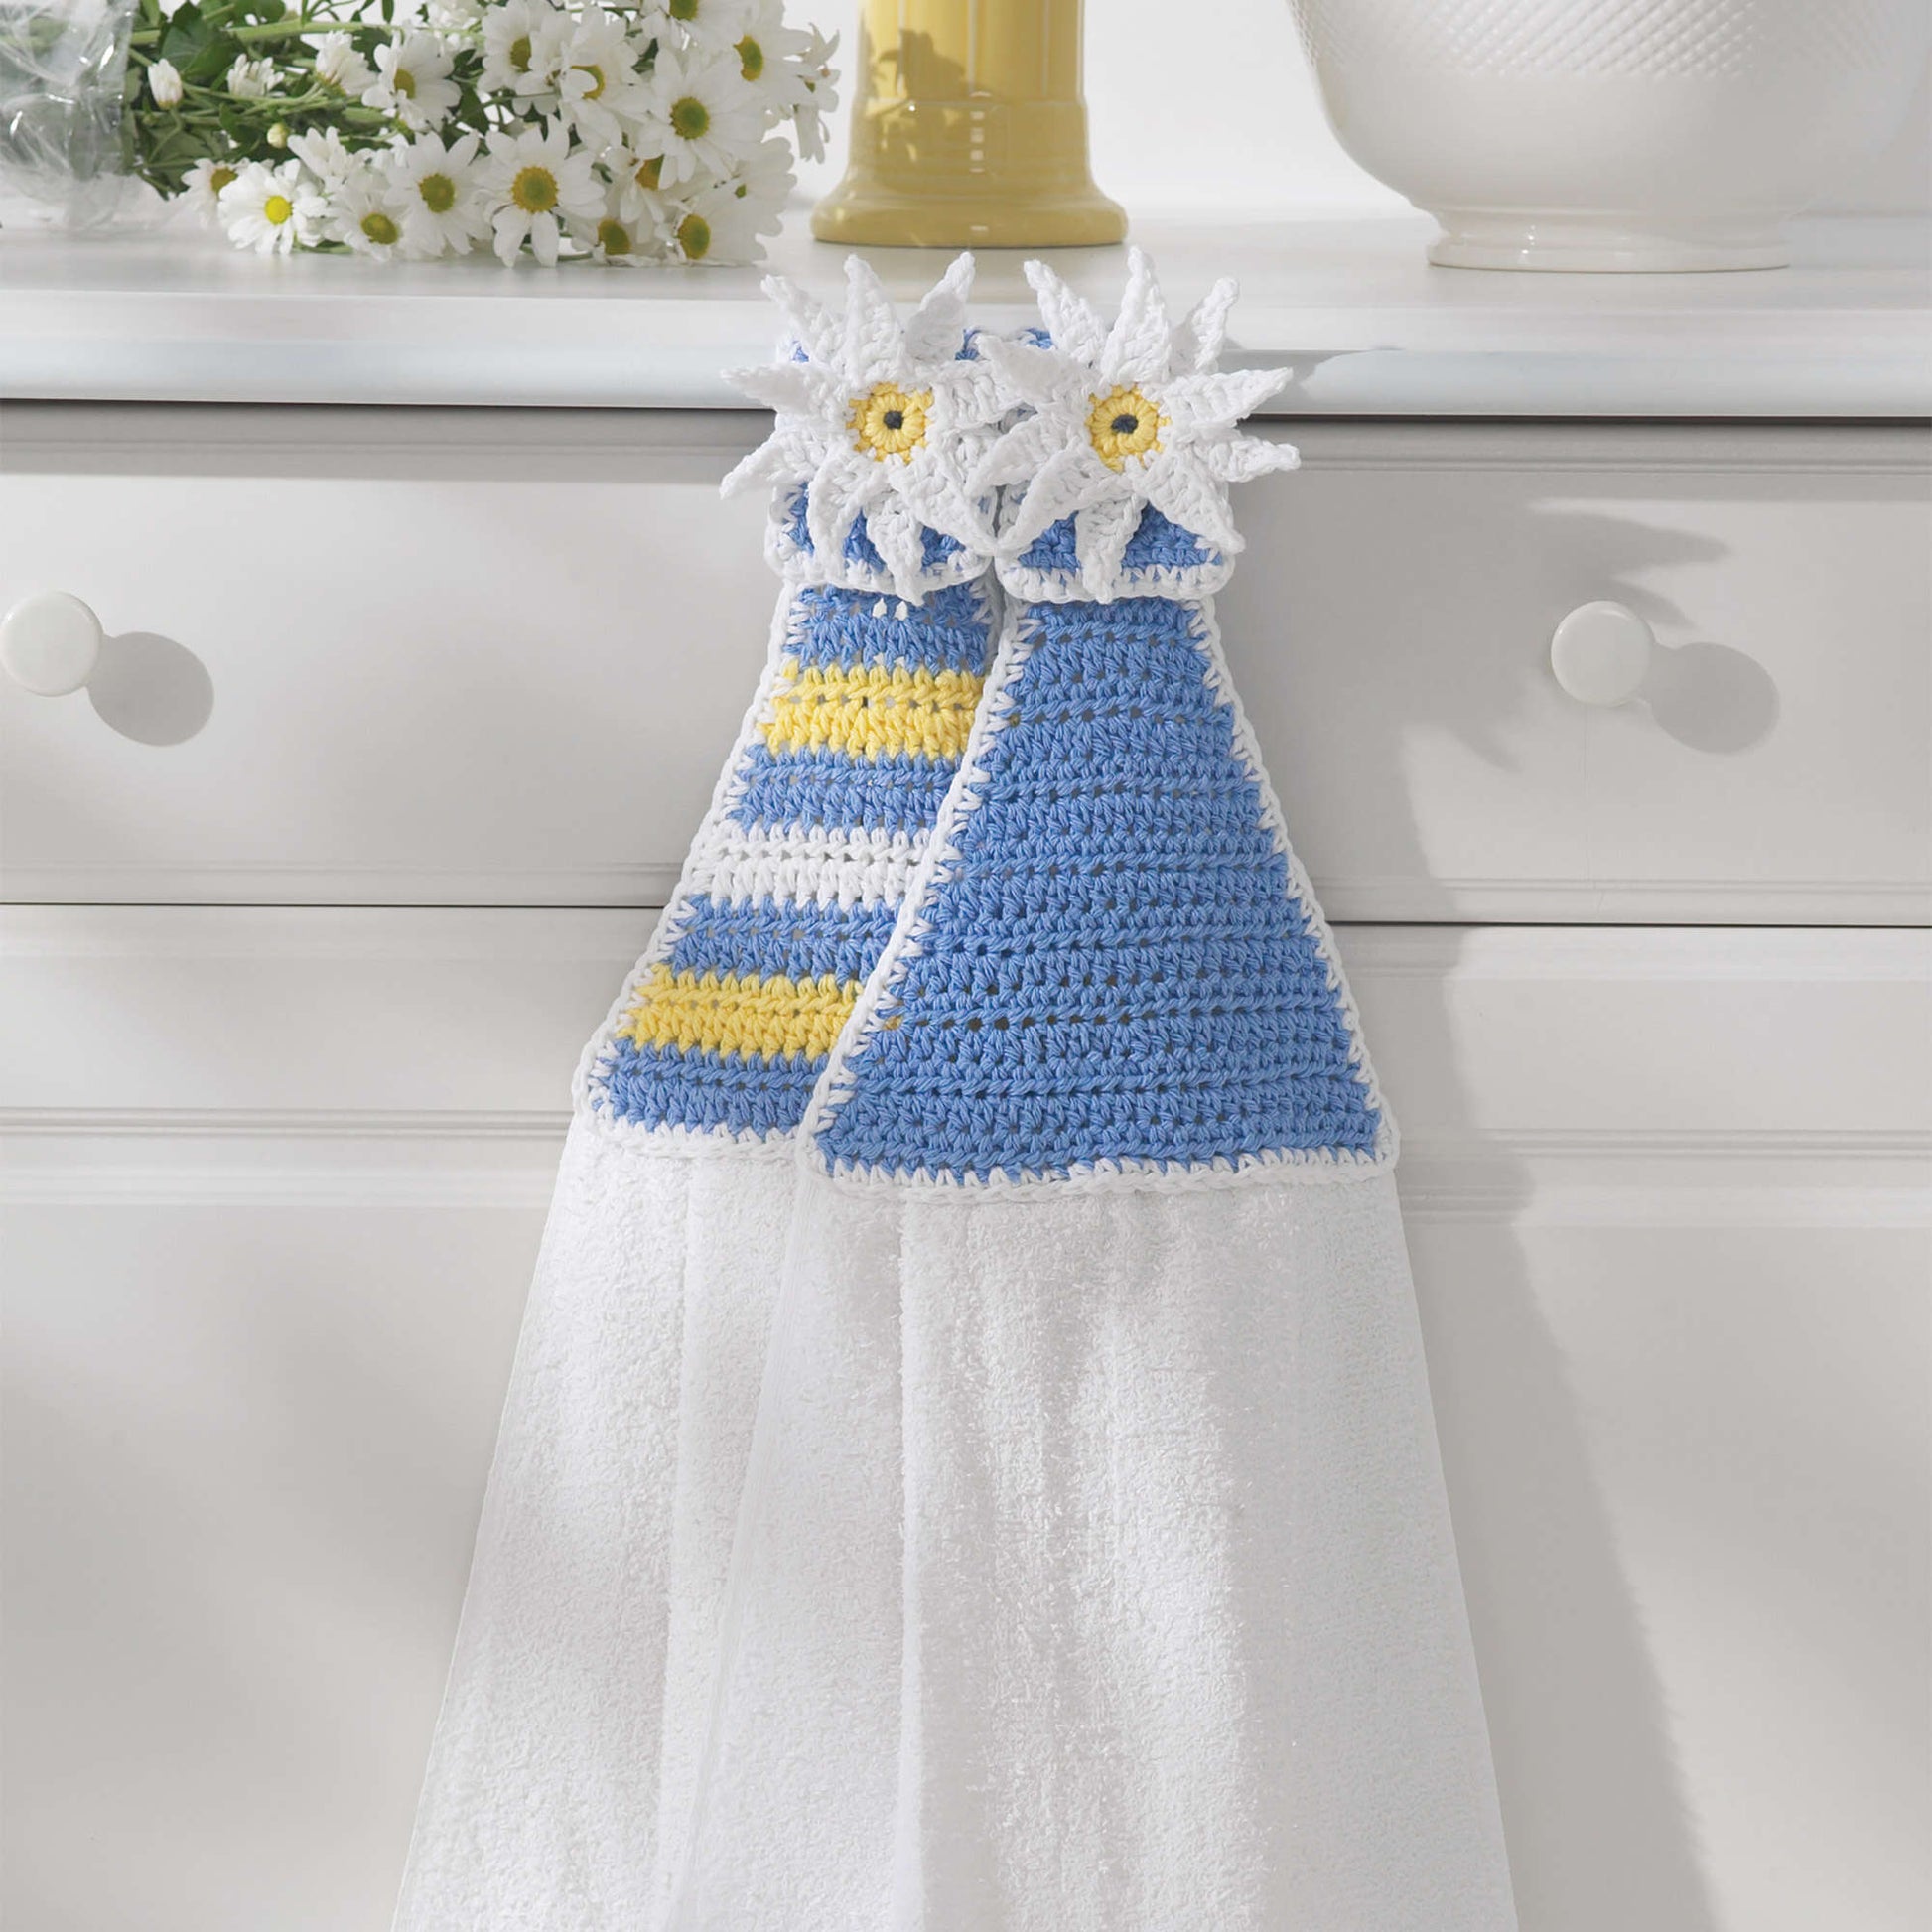 Free Lily Sugar'n Cream Floral Crochet Towel Toppers Pattern